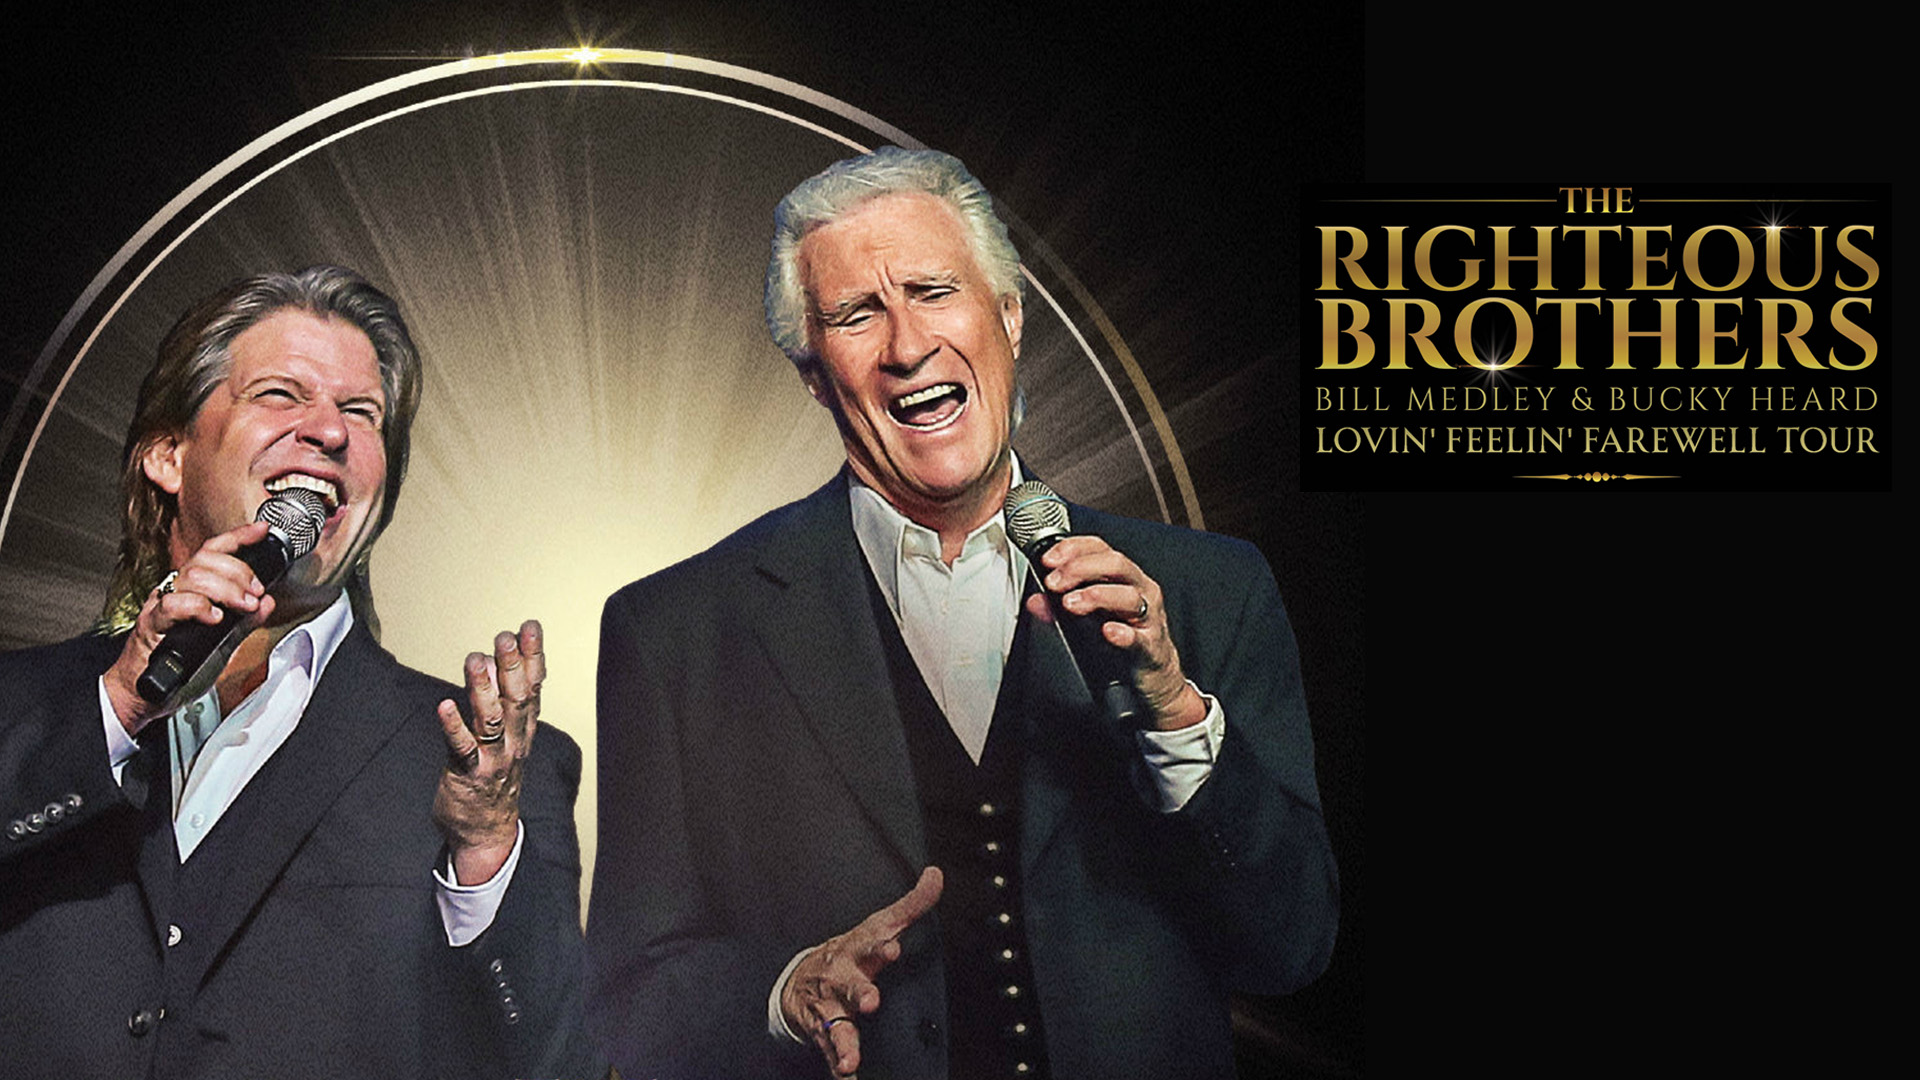 The Righteous Brothers: Lovin' Feeling Farewell Tour